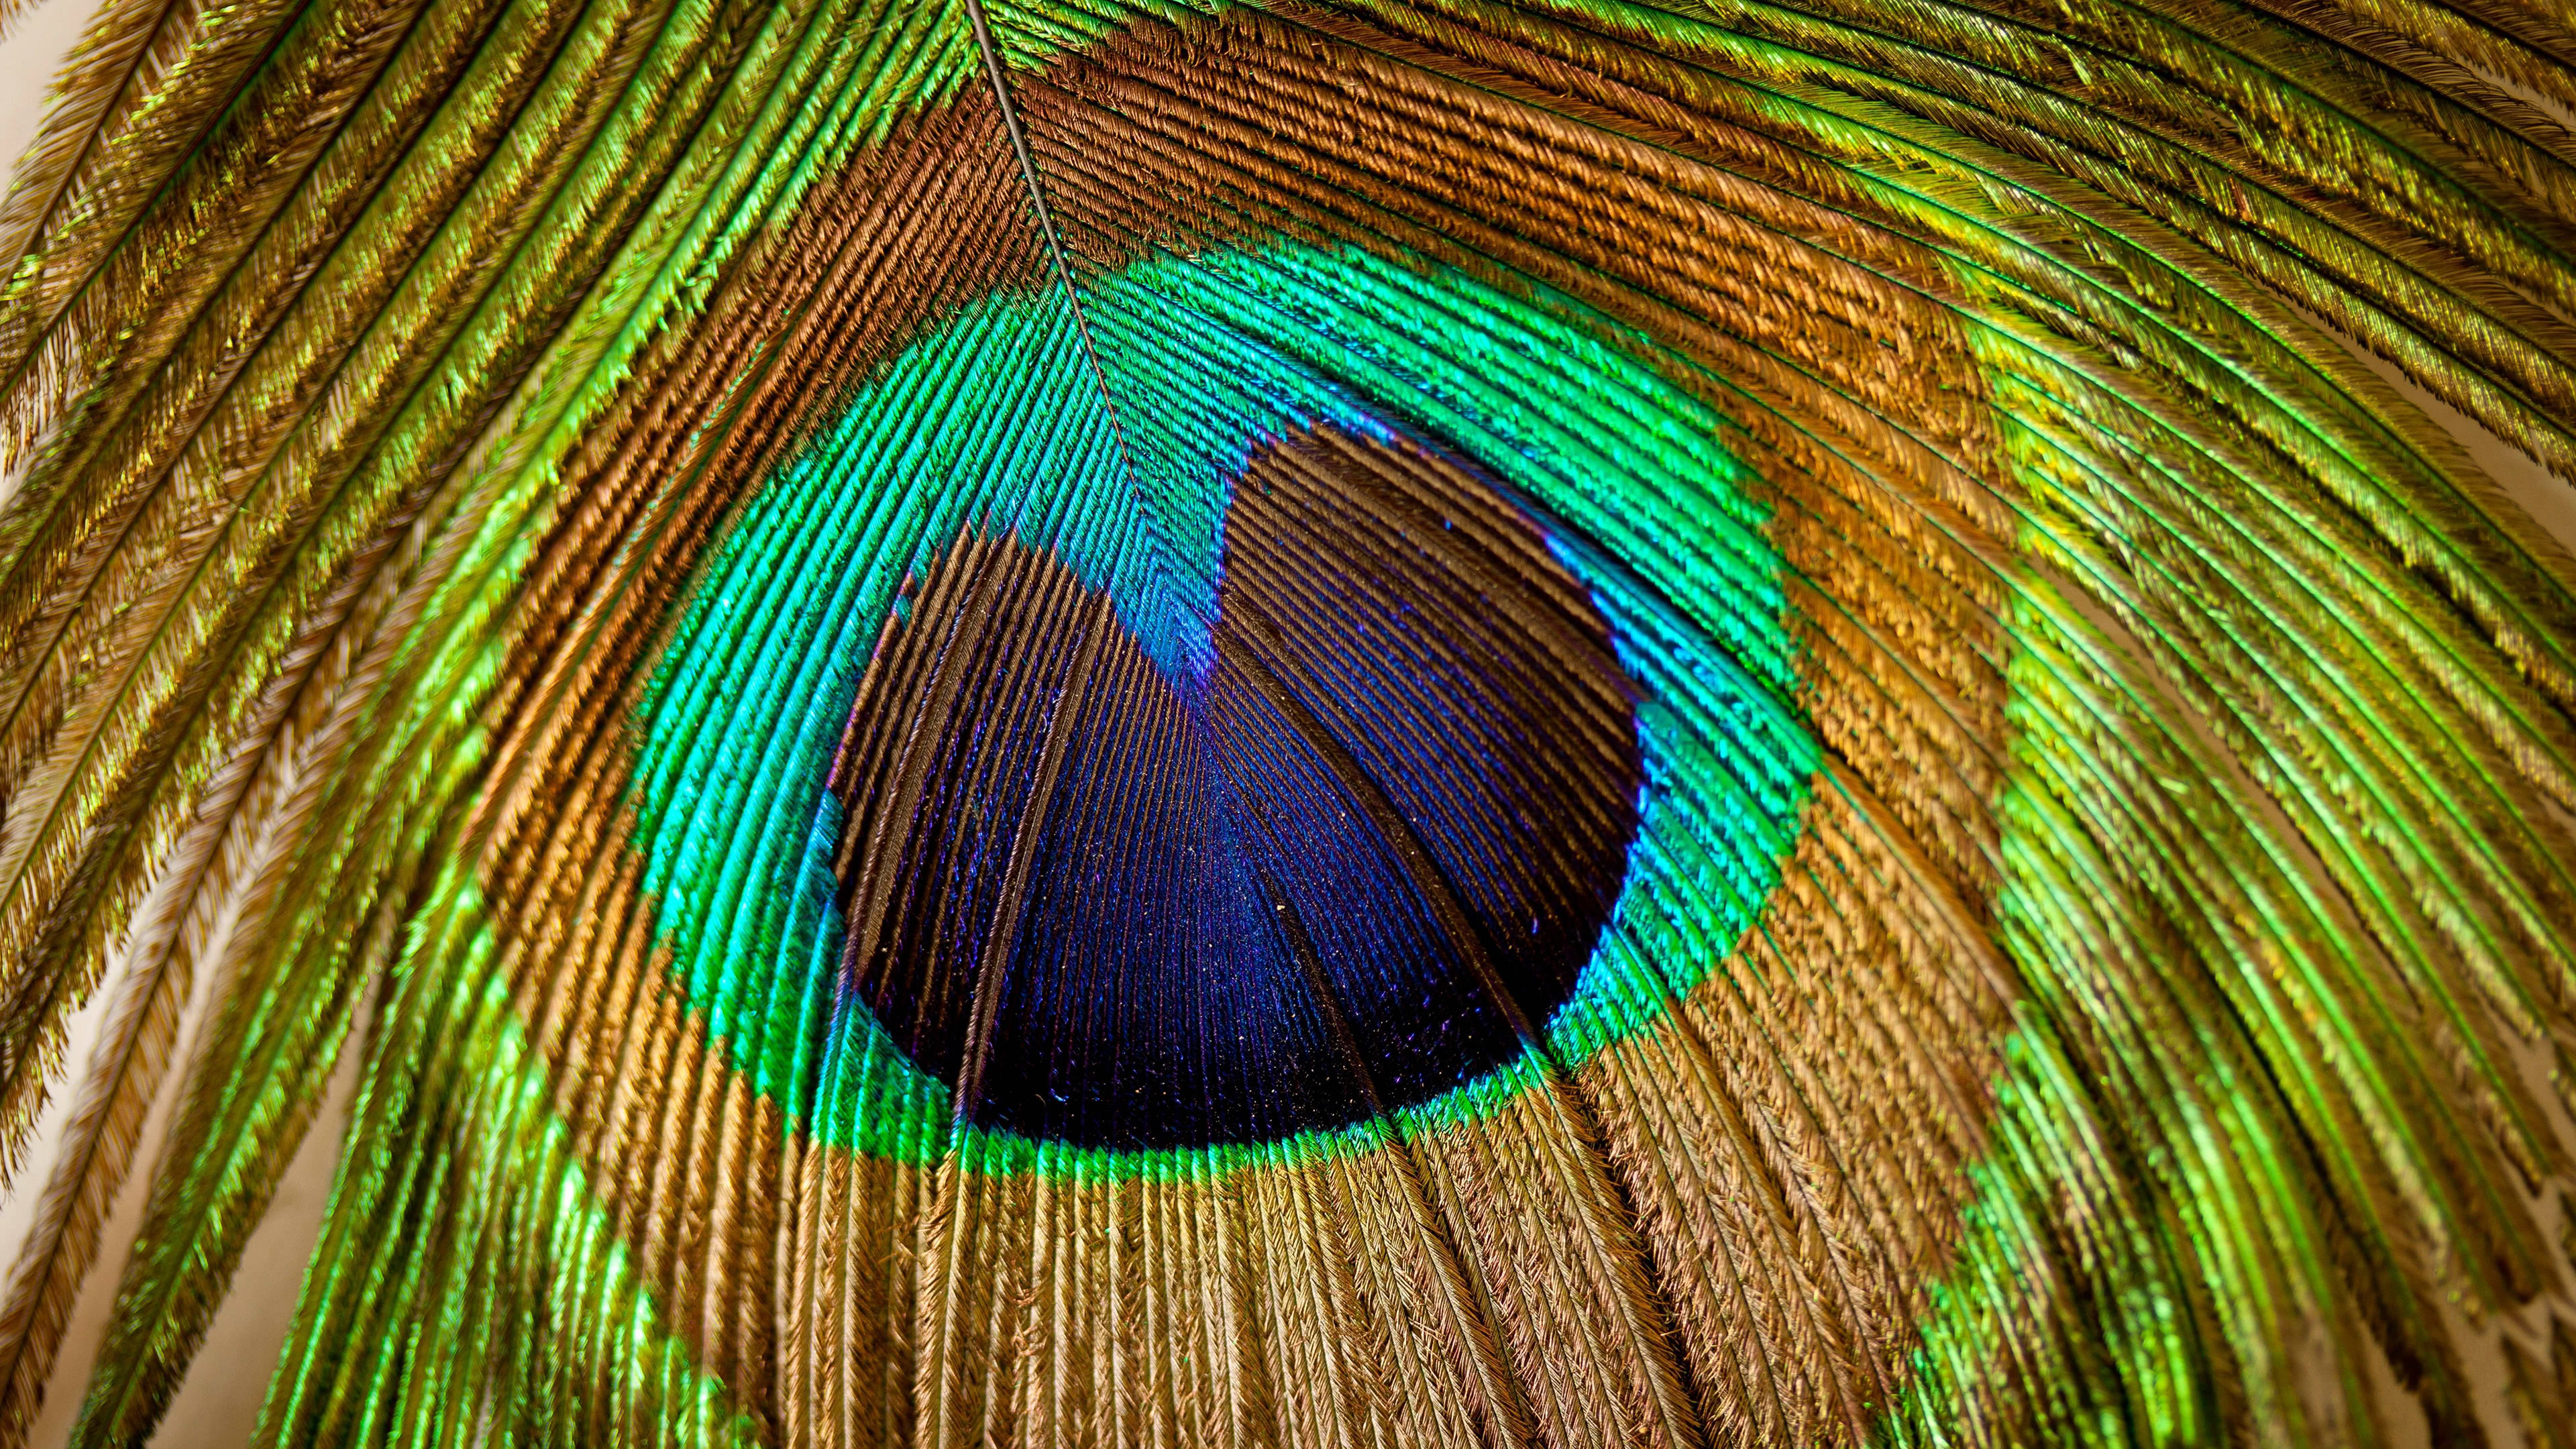 Peacock Feather Uhd 4k Wallpaper - Peacock Feather Hd Png - 3840x2160  Wallpaper 